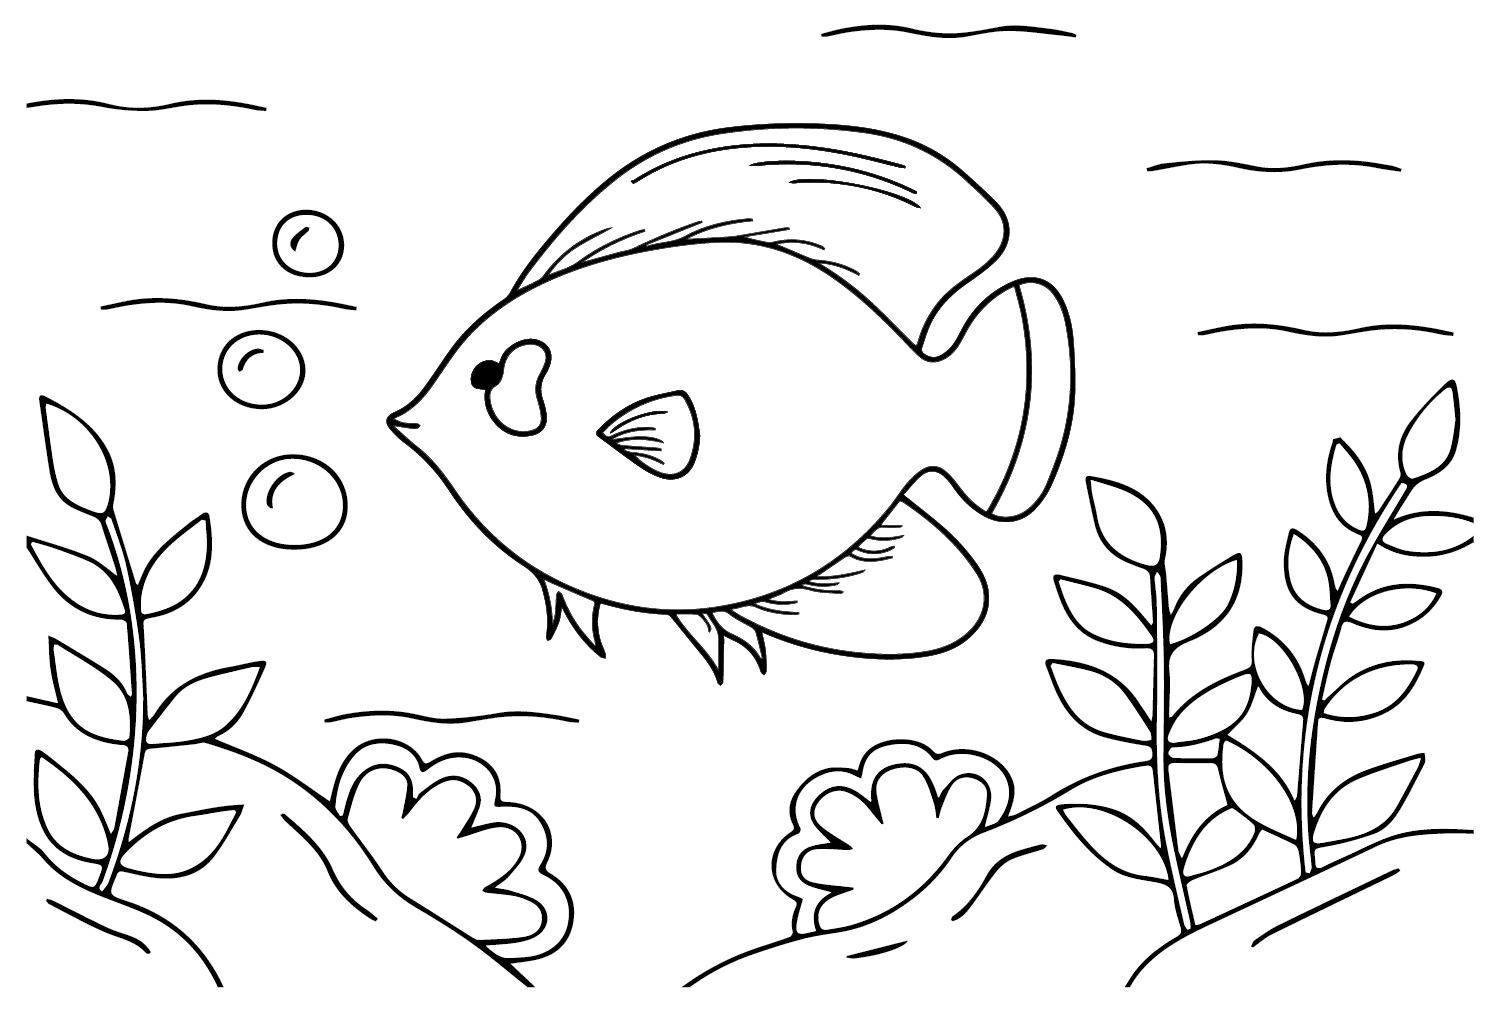 Tang Fish Saltwater Coloring Page - Free Printable Coloring Pages